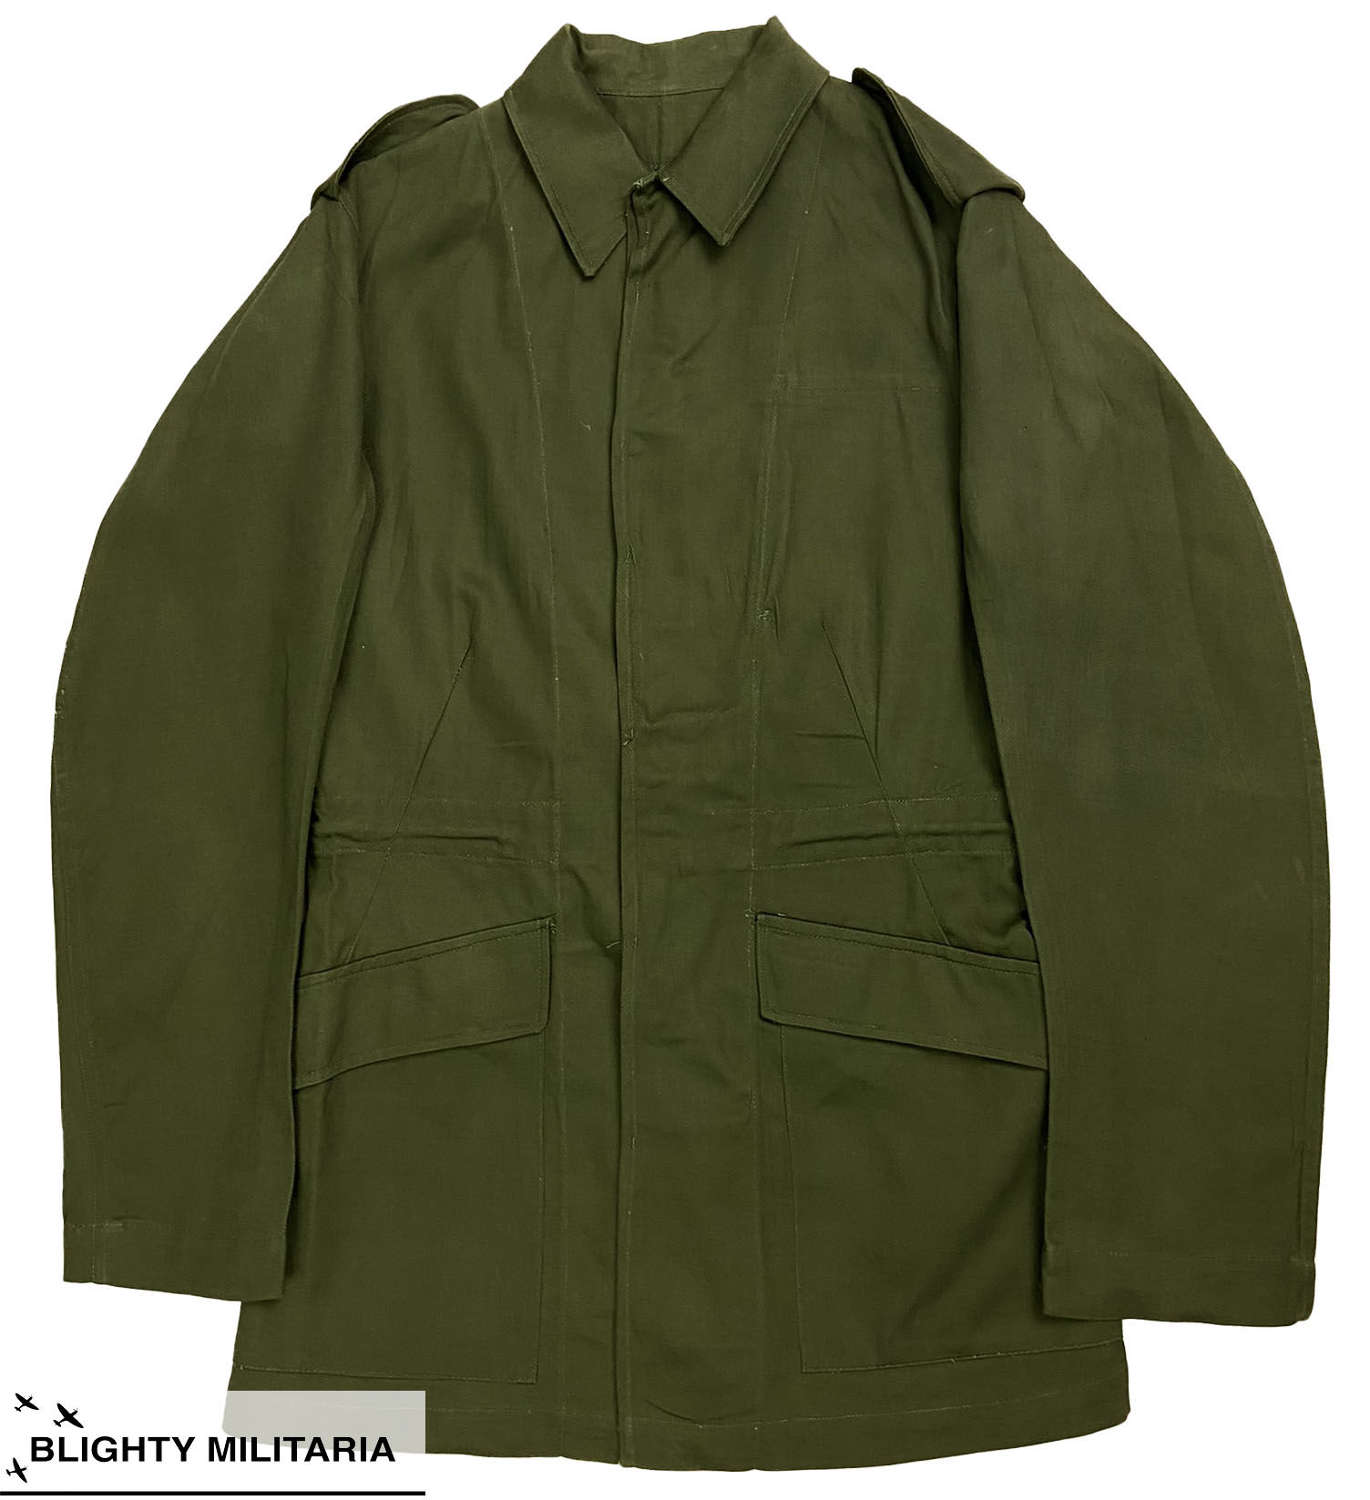 Original 1964 Dated British Army 'Jacket, Overall, Green' - Size 7